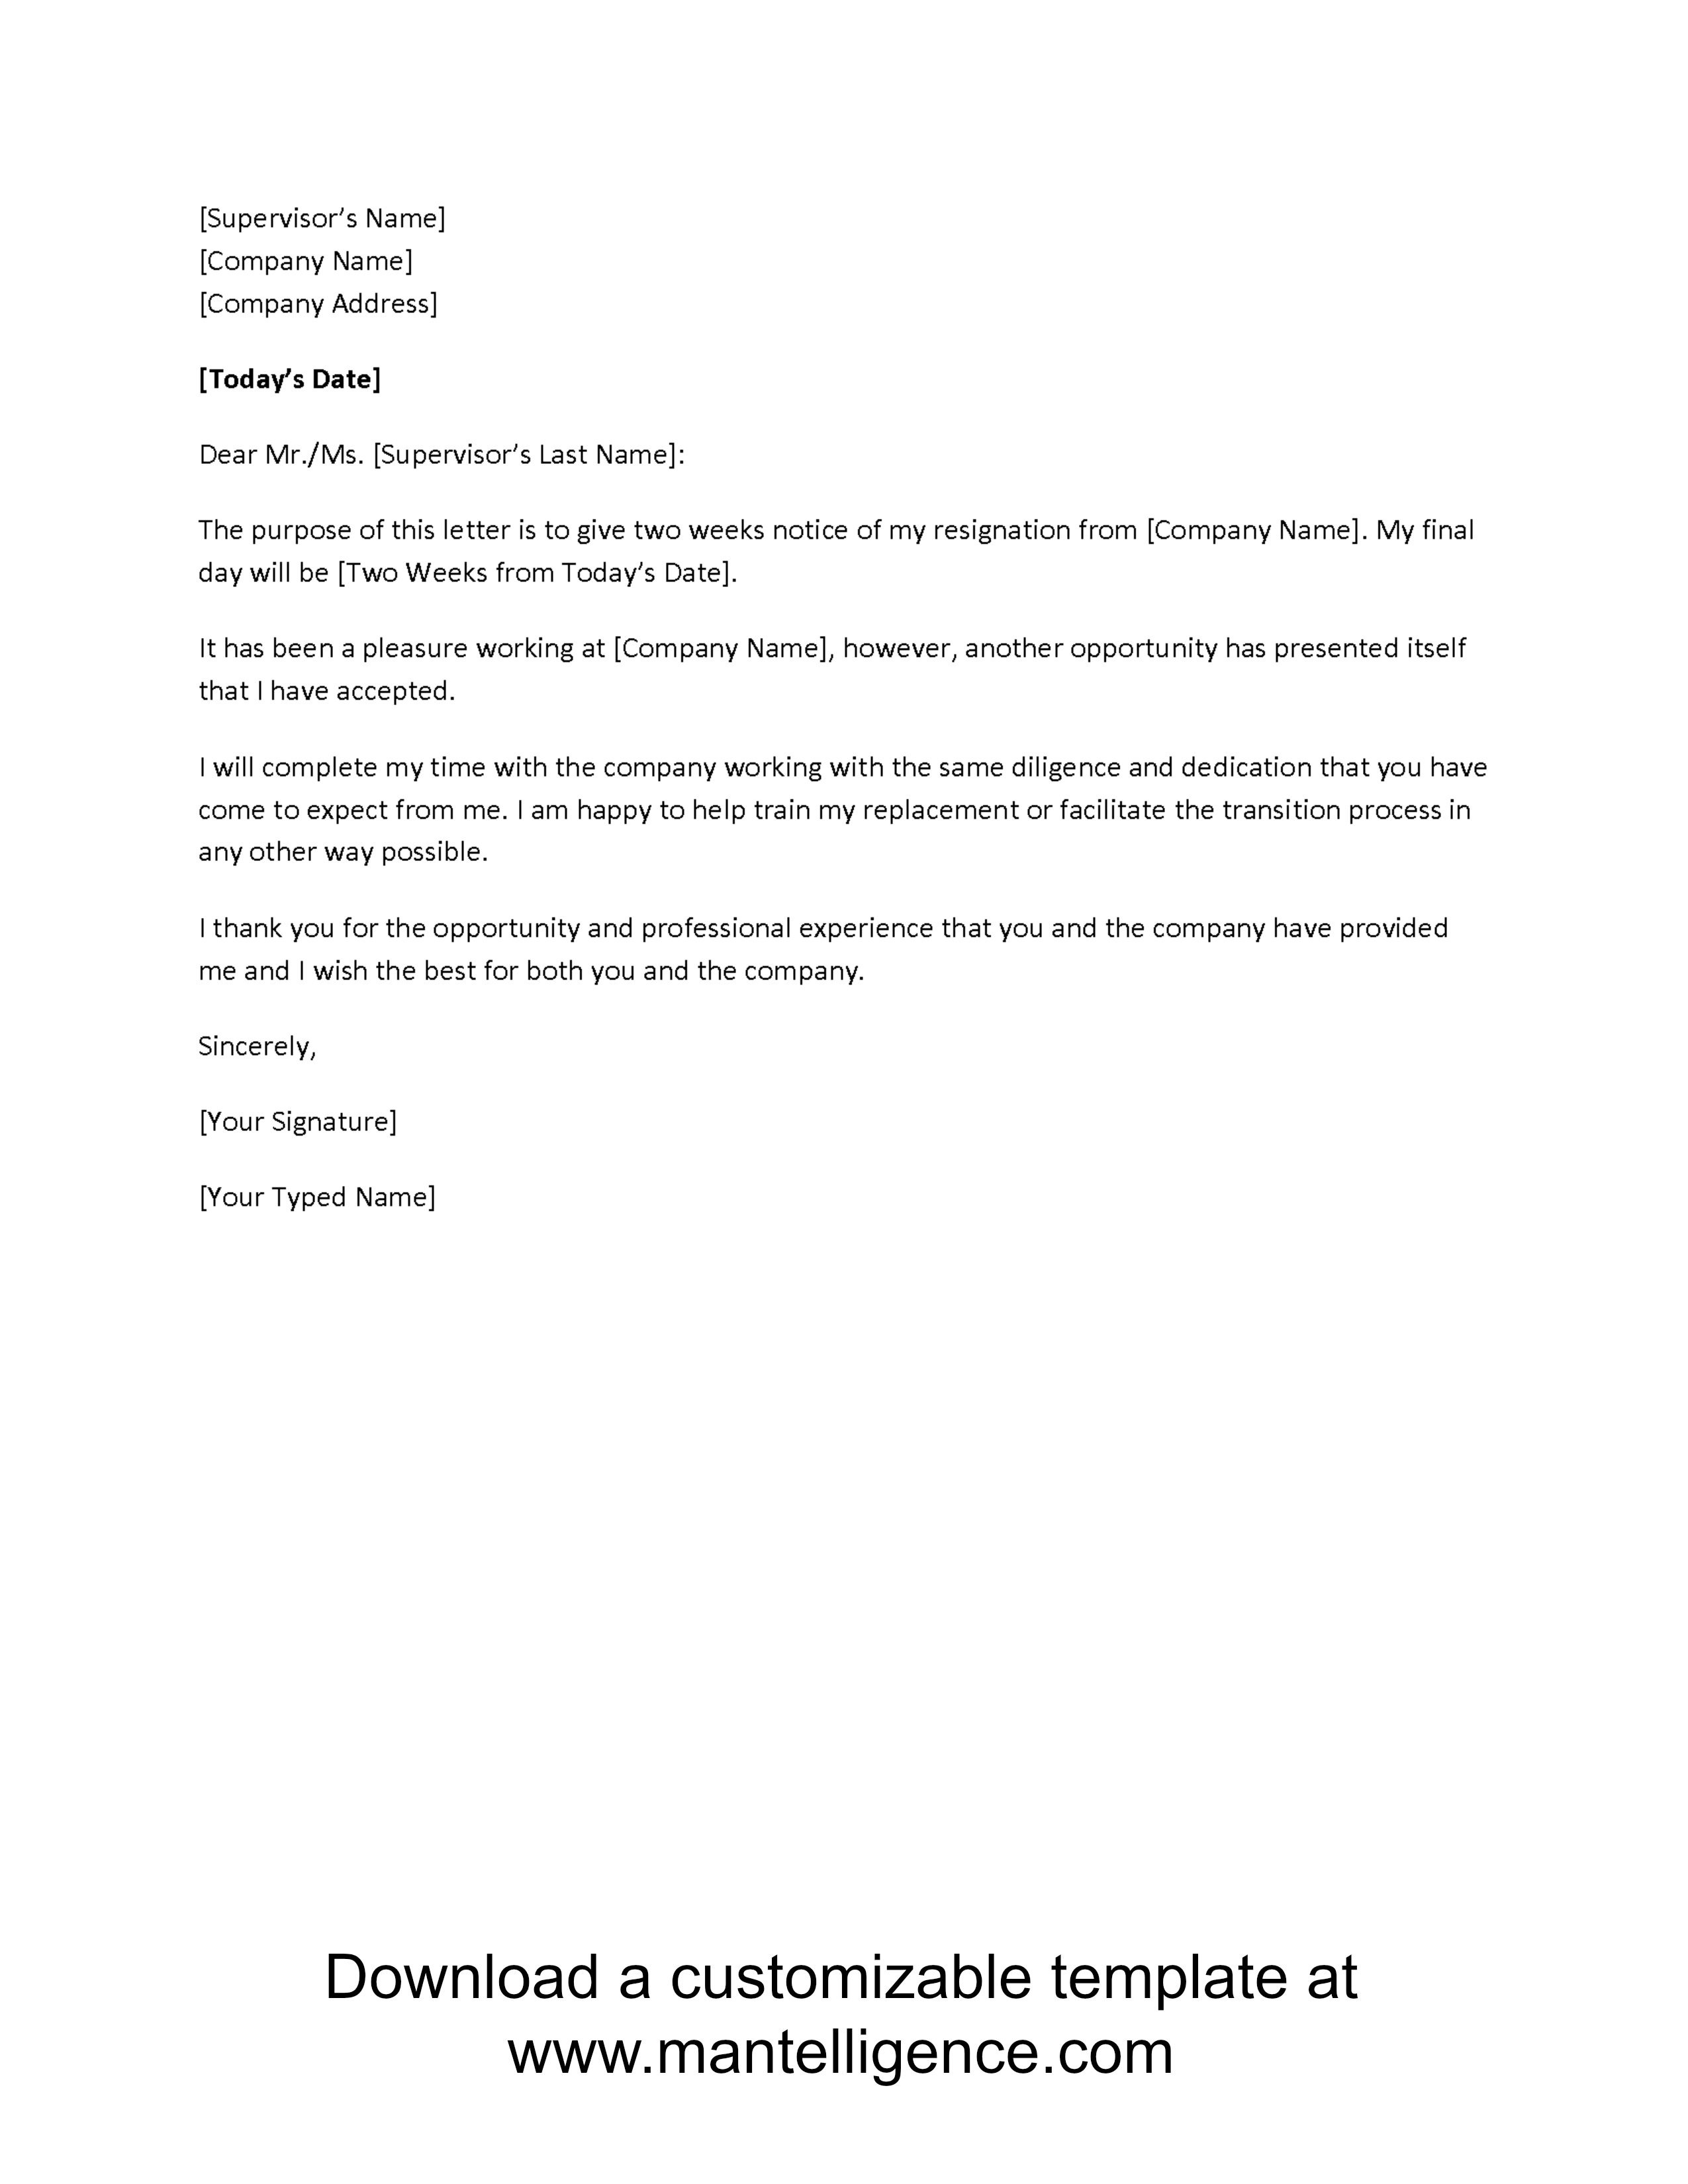 7 Day Notice Letter Construction Template - 3 Highly Professional Two Weeks Notice Letter Templates